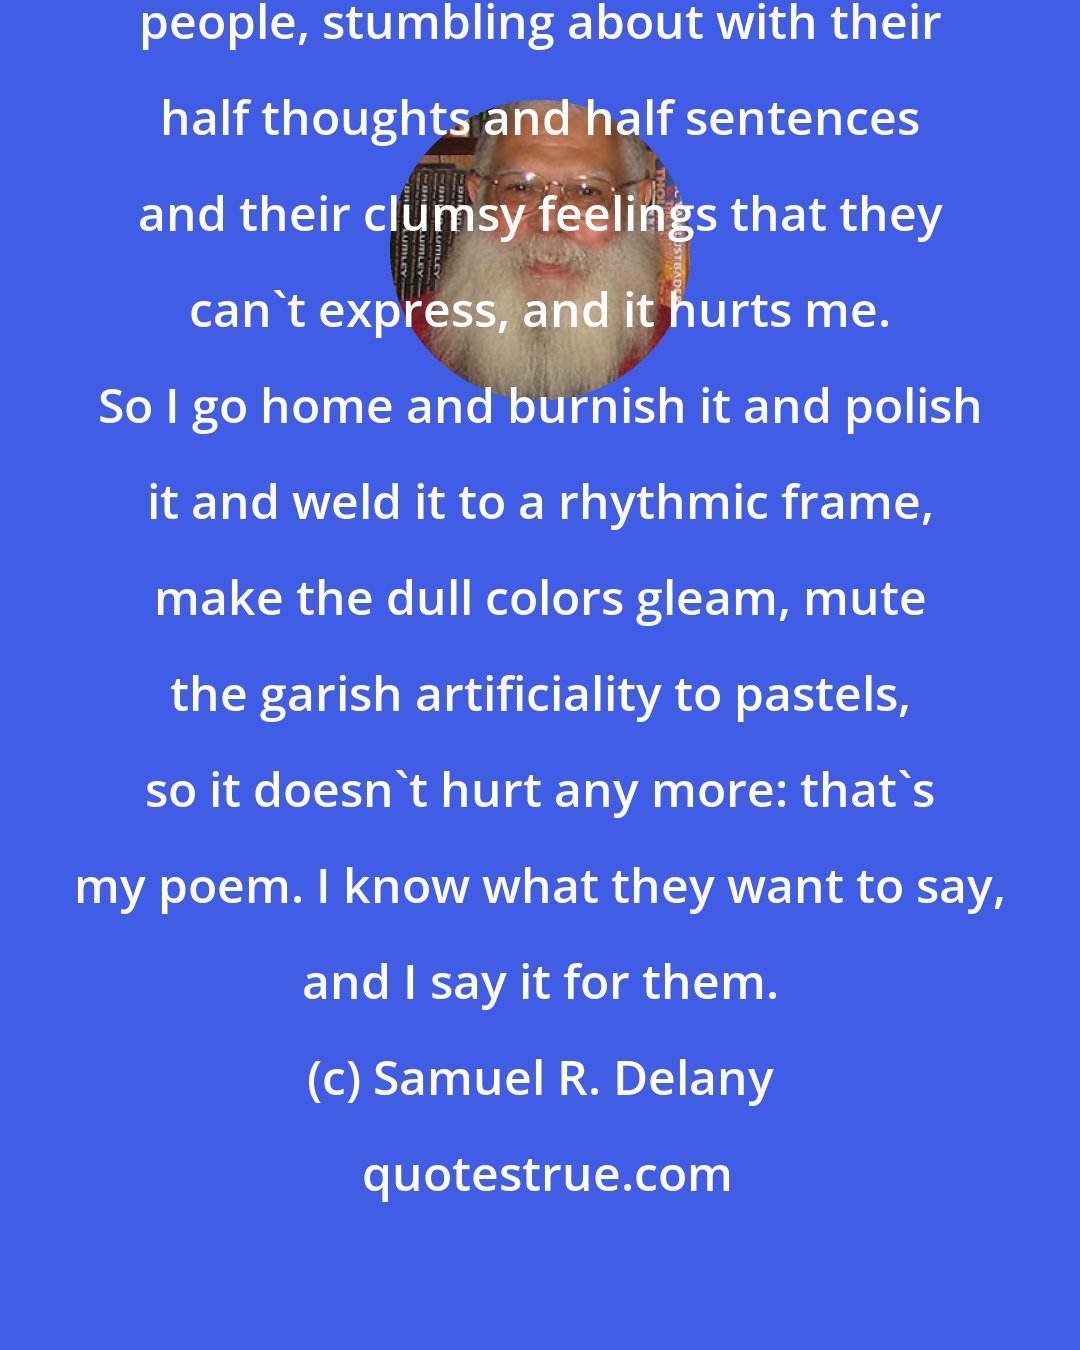 Samuel R. Delany: You know what I do? I listen to other people, stumbling about with their half thoughts and half sentences and their clumsy feelings that they can't express, and it hurts me. So I go home and burnish it and polish it and weld it to a rhythmic frame, make the dull colors gleam, mute the garish artificiality to pastels, so it doesn't hurt any more: that's my poem. I know what they want to say, and I say it for them.